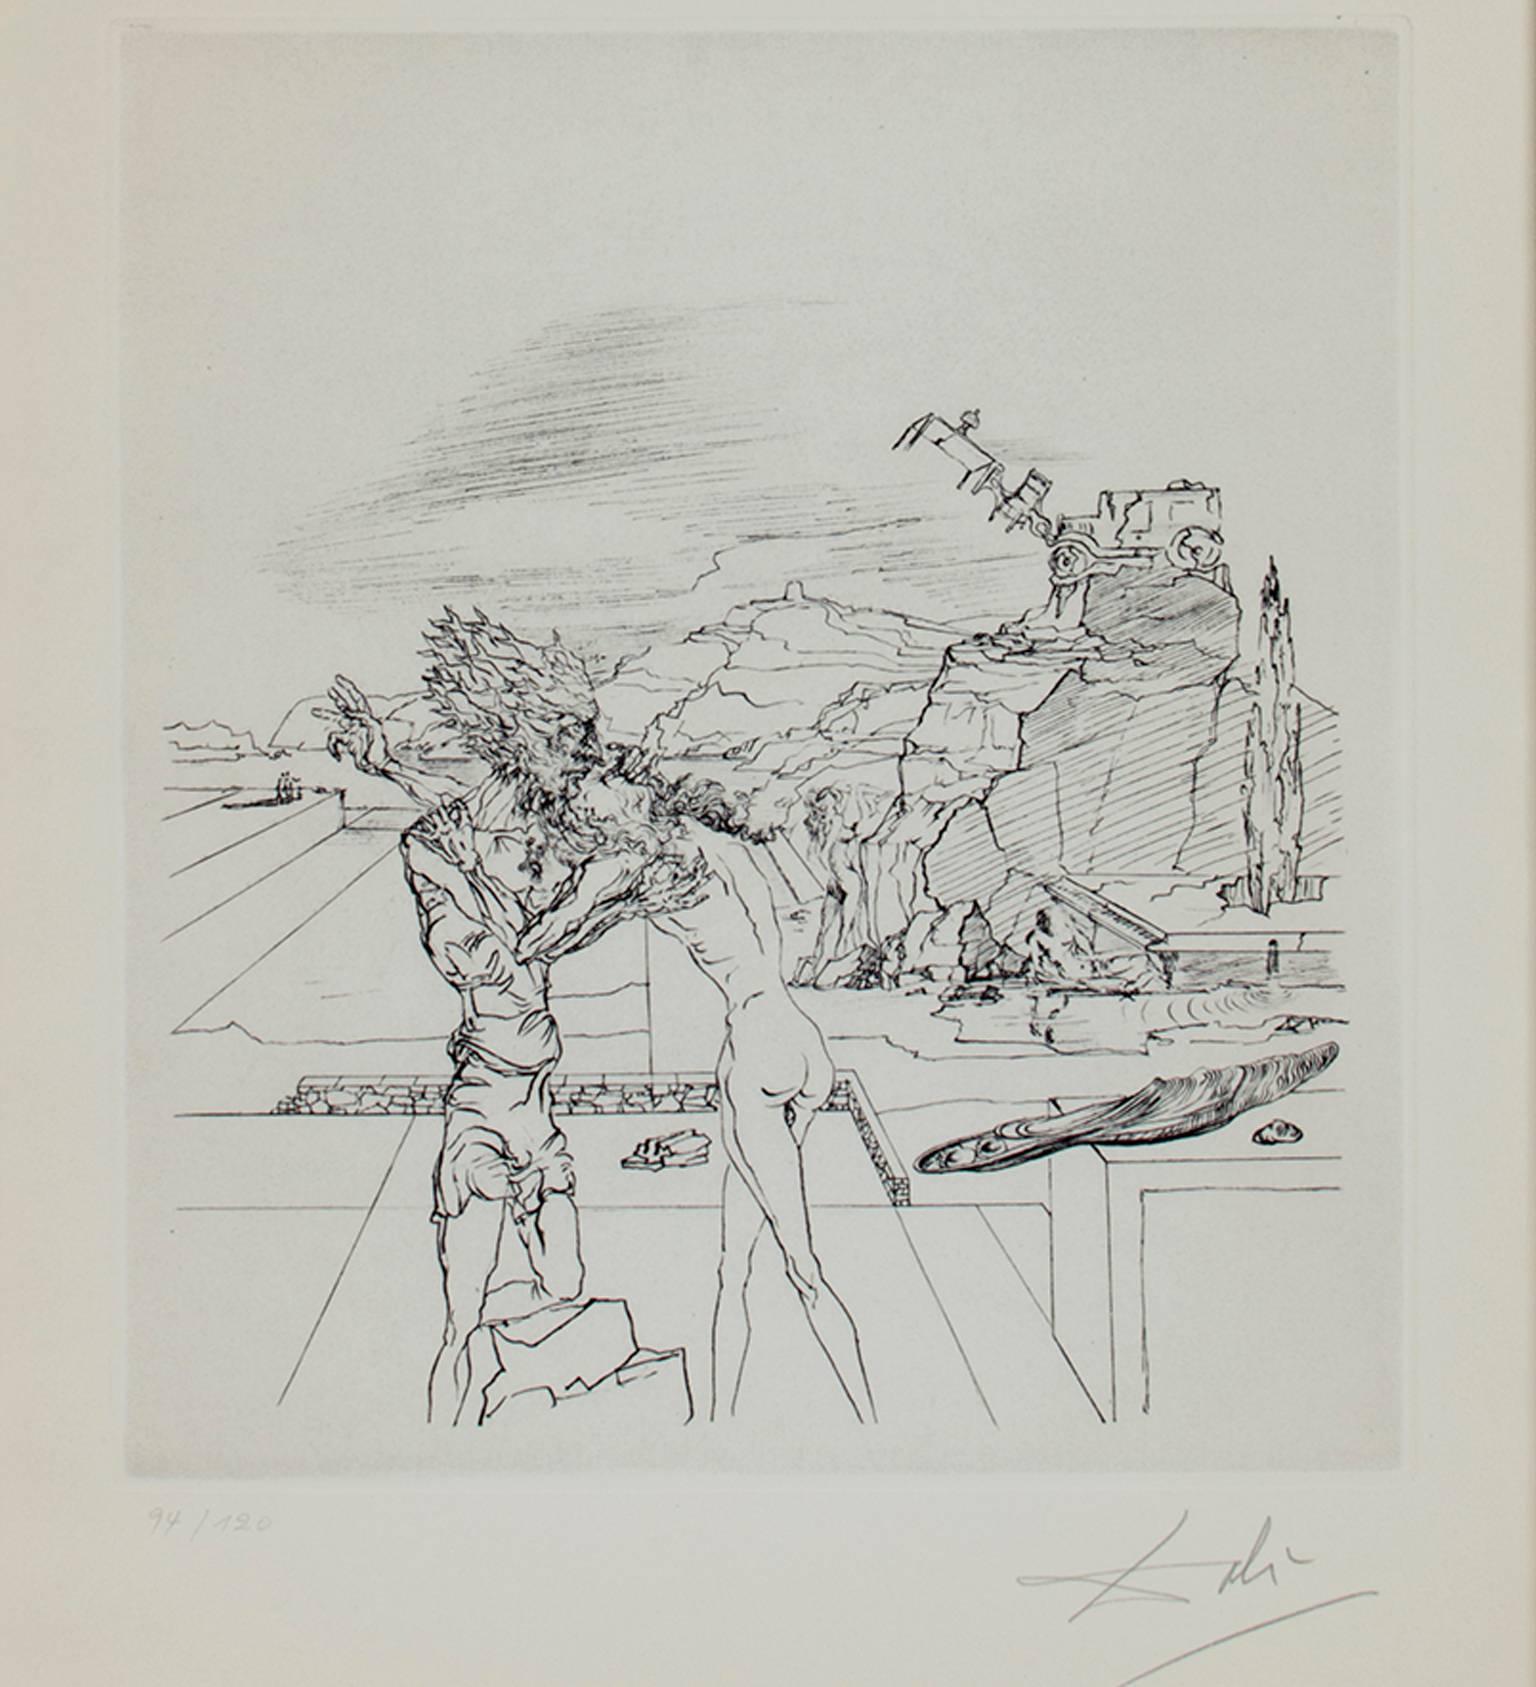 Salvador Dalí Figurative Print - "Surrealist Sunday, " Heliogravure, engraved after the drawing, signed by Dali